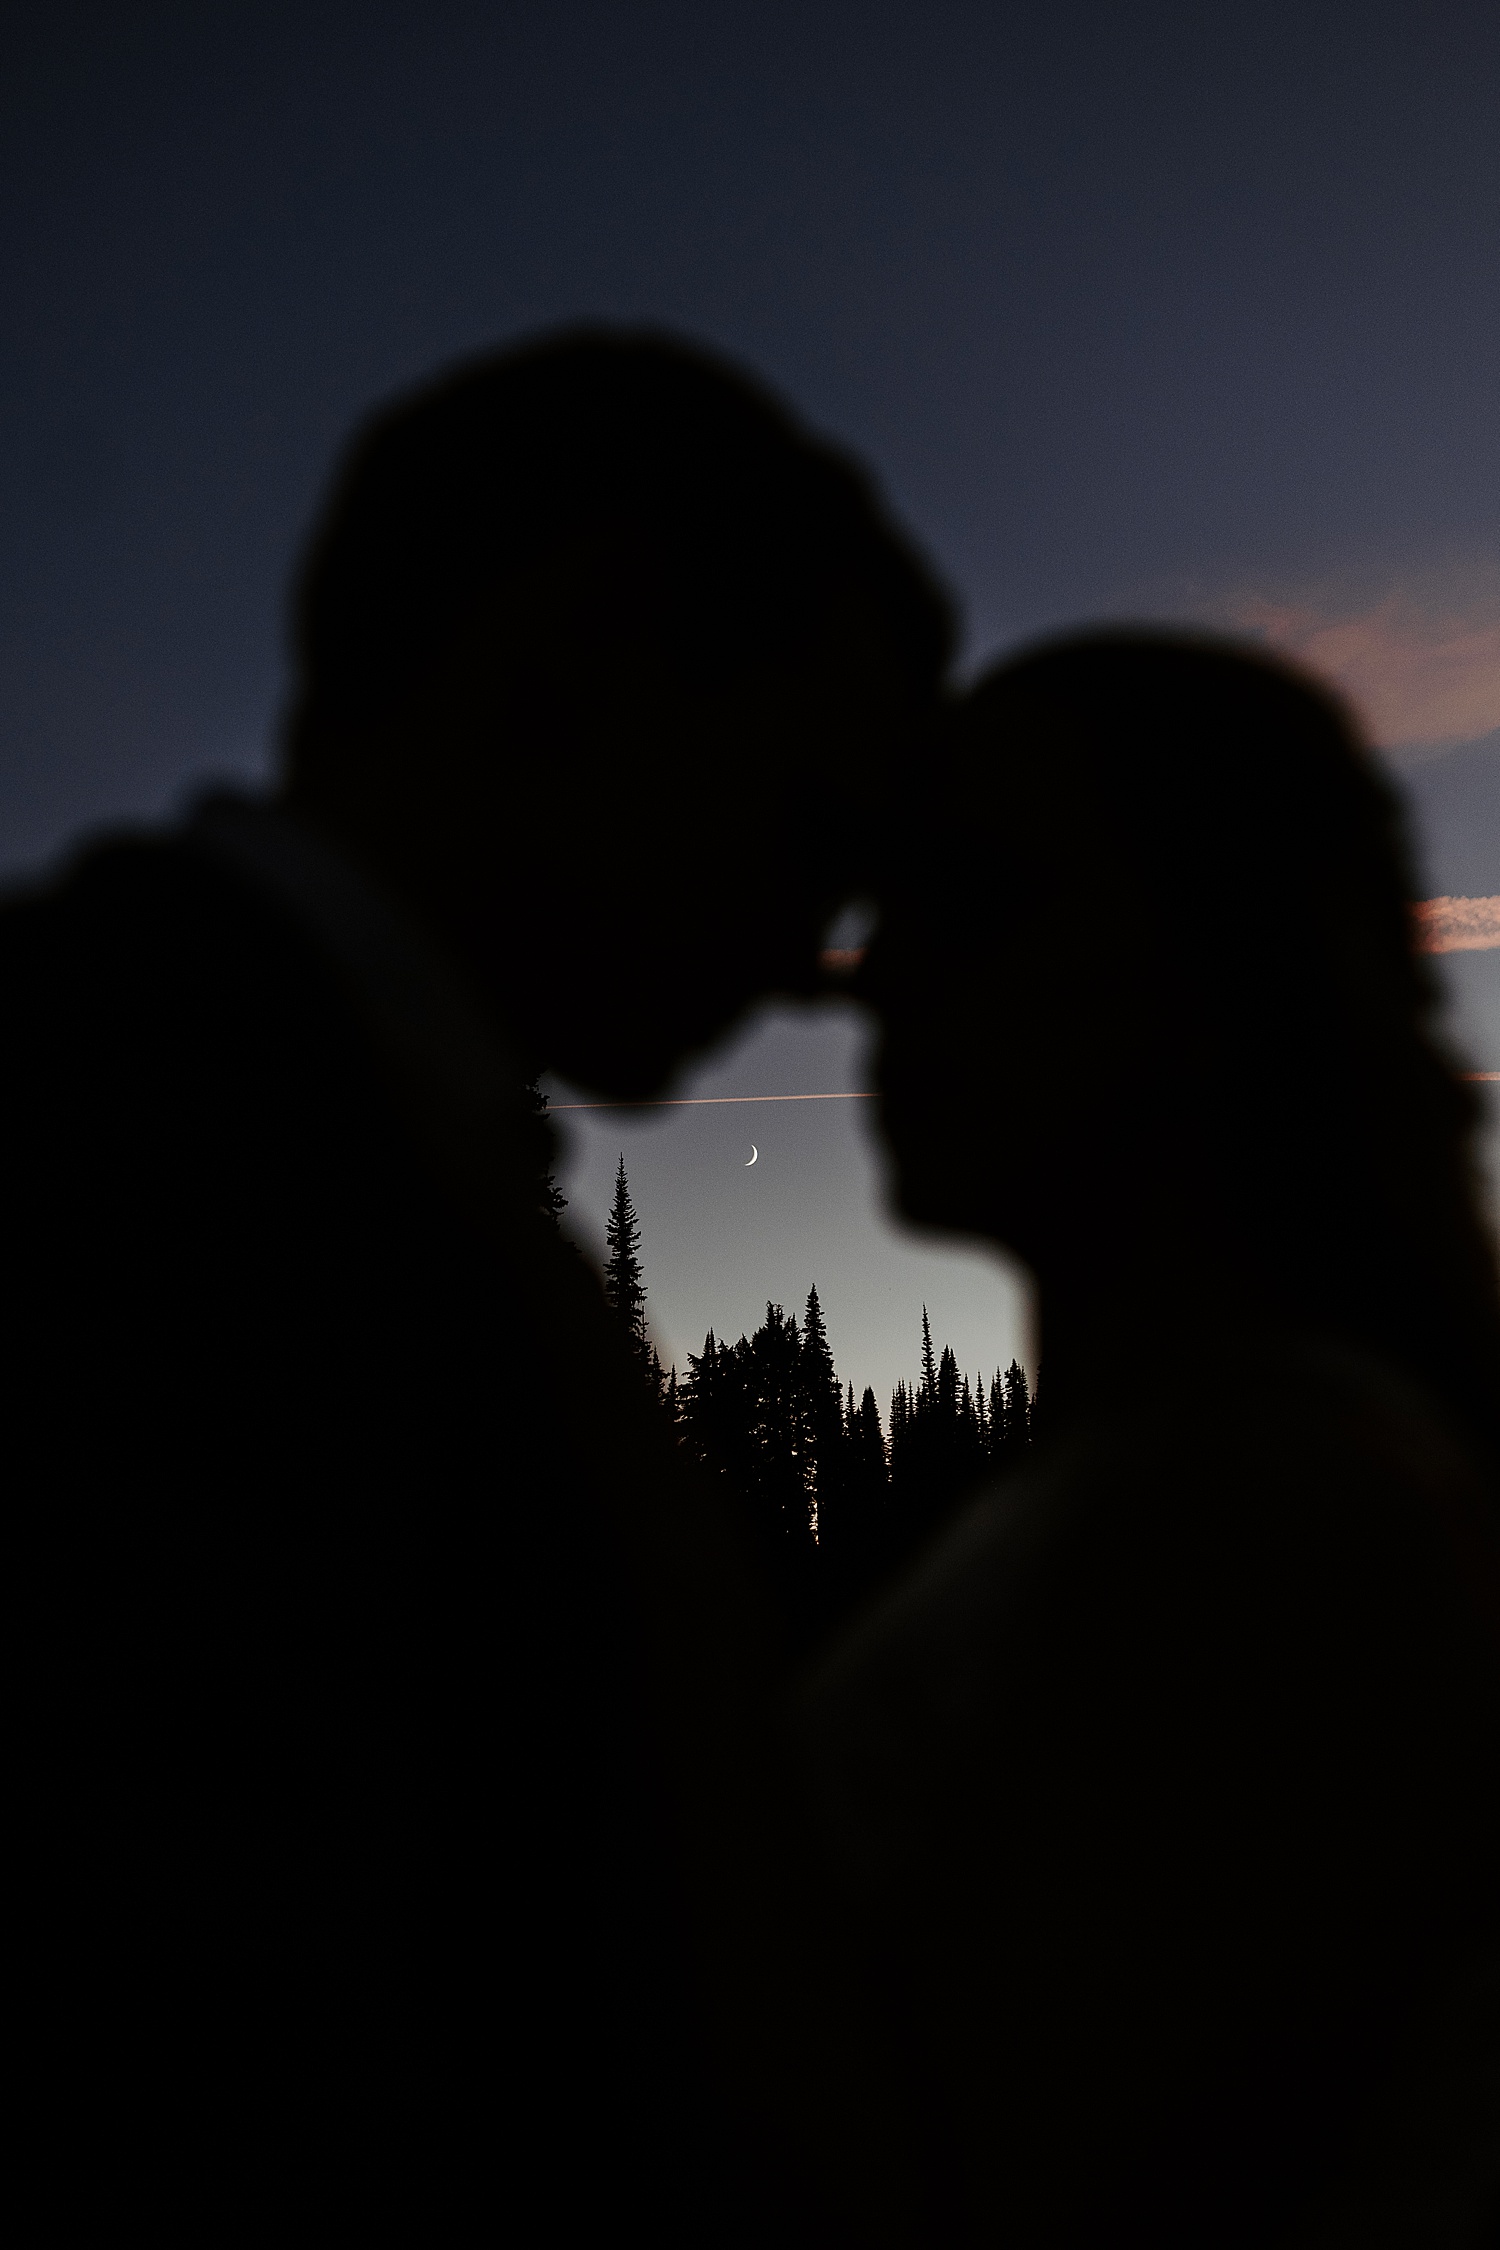 night photo of bride and groom with the moon